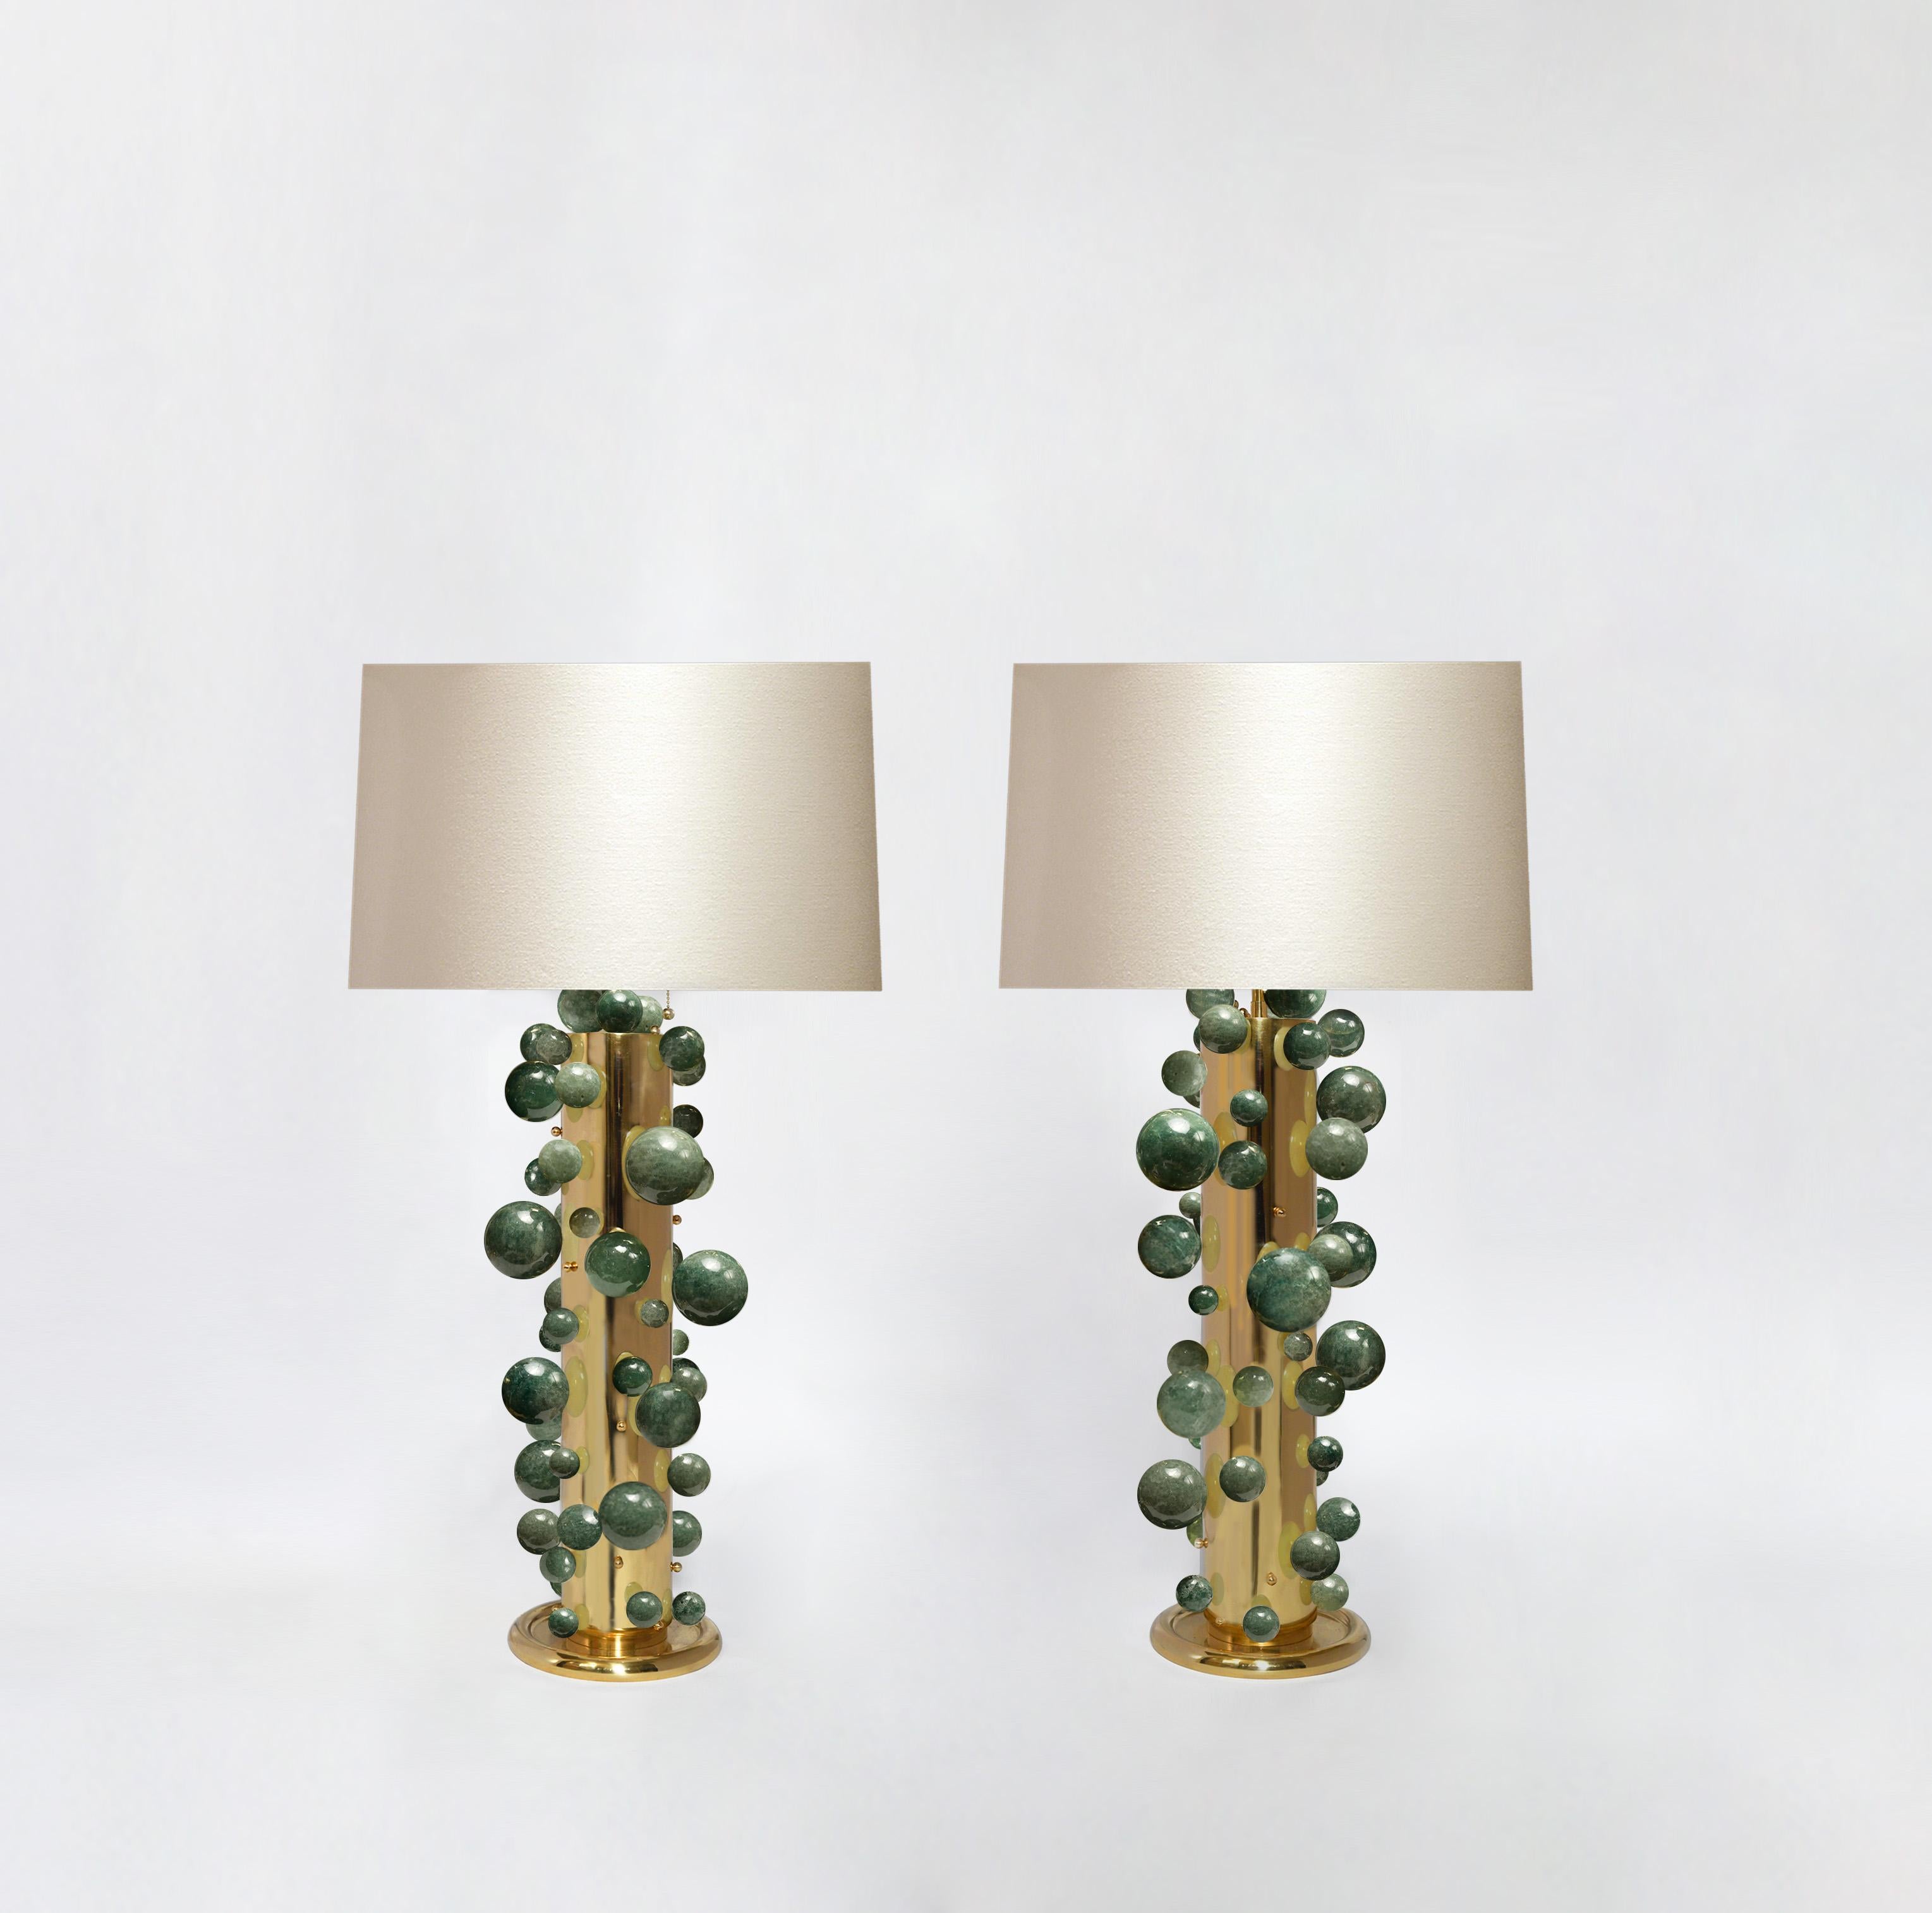 A tall pair of luxury green rock crystal quartz bubble lamps with polish brass frames. Created by Phoenix Gallery, NYC.
Each lamp installed two sockets.
To the top of the rock crystal 25.75